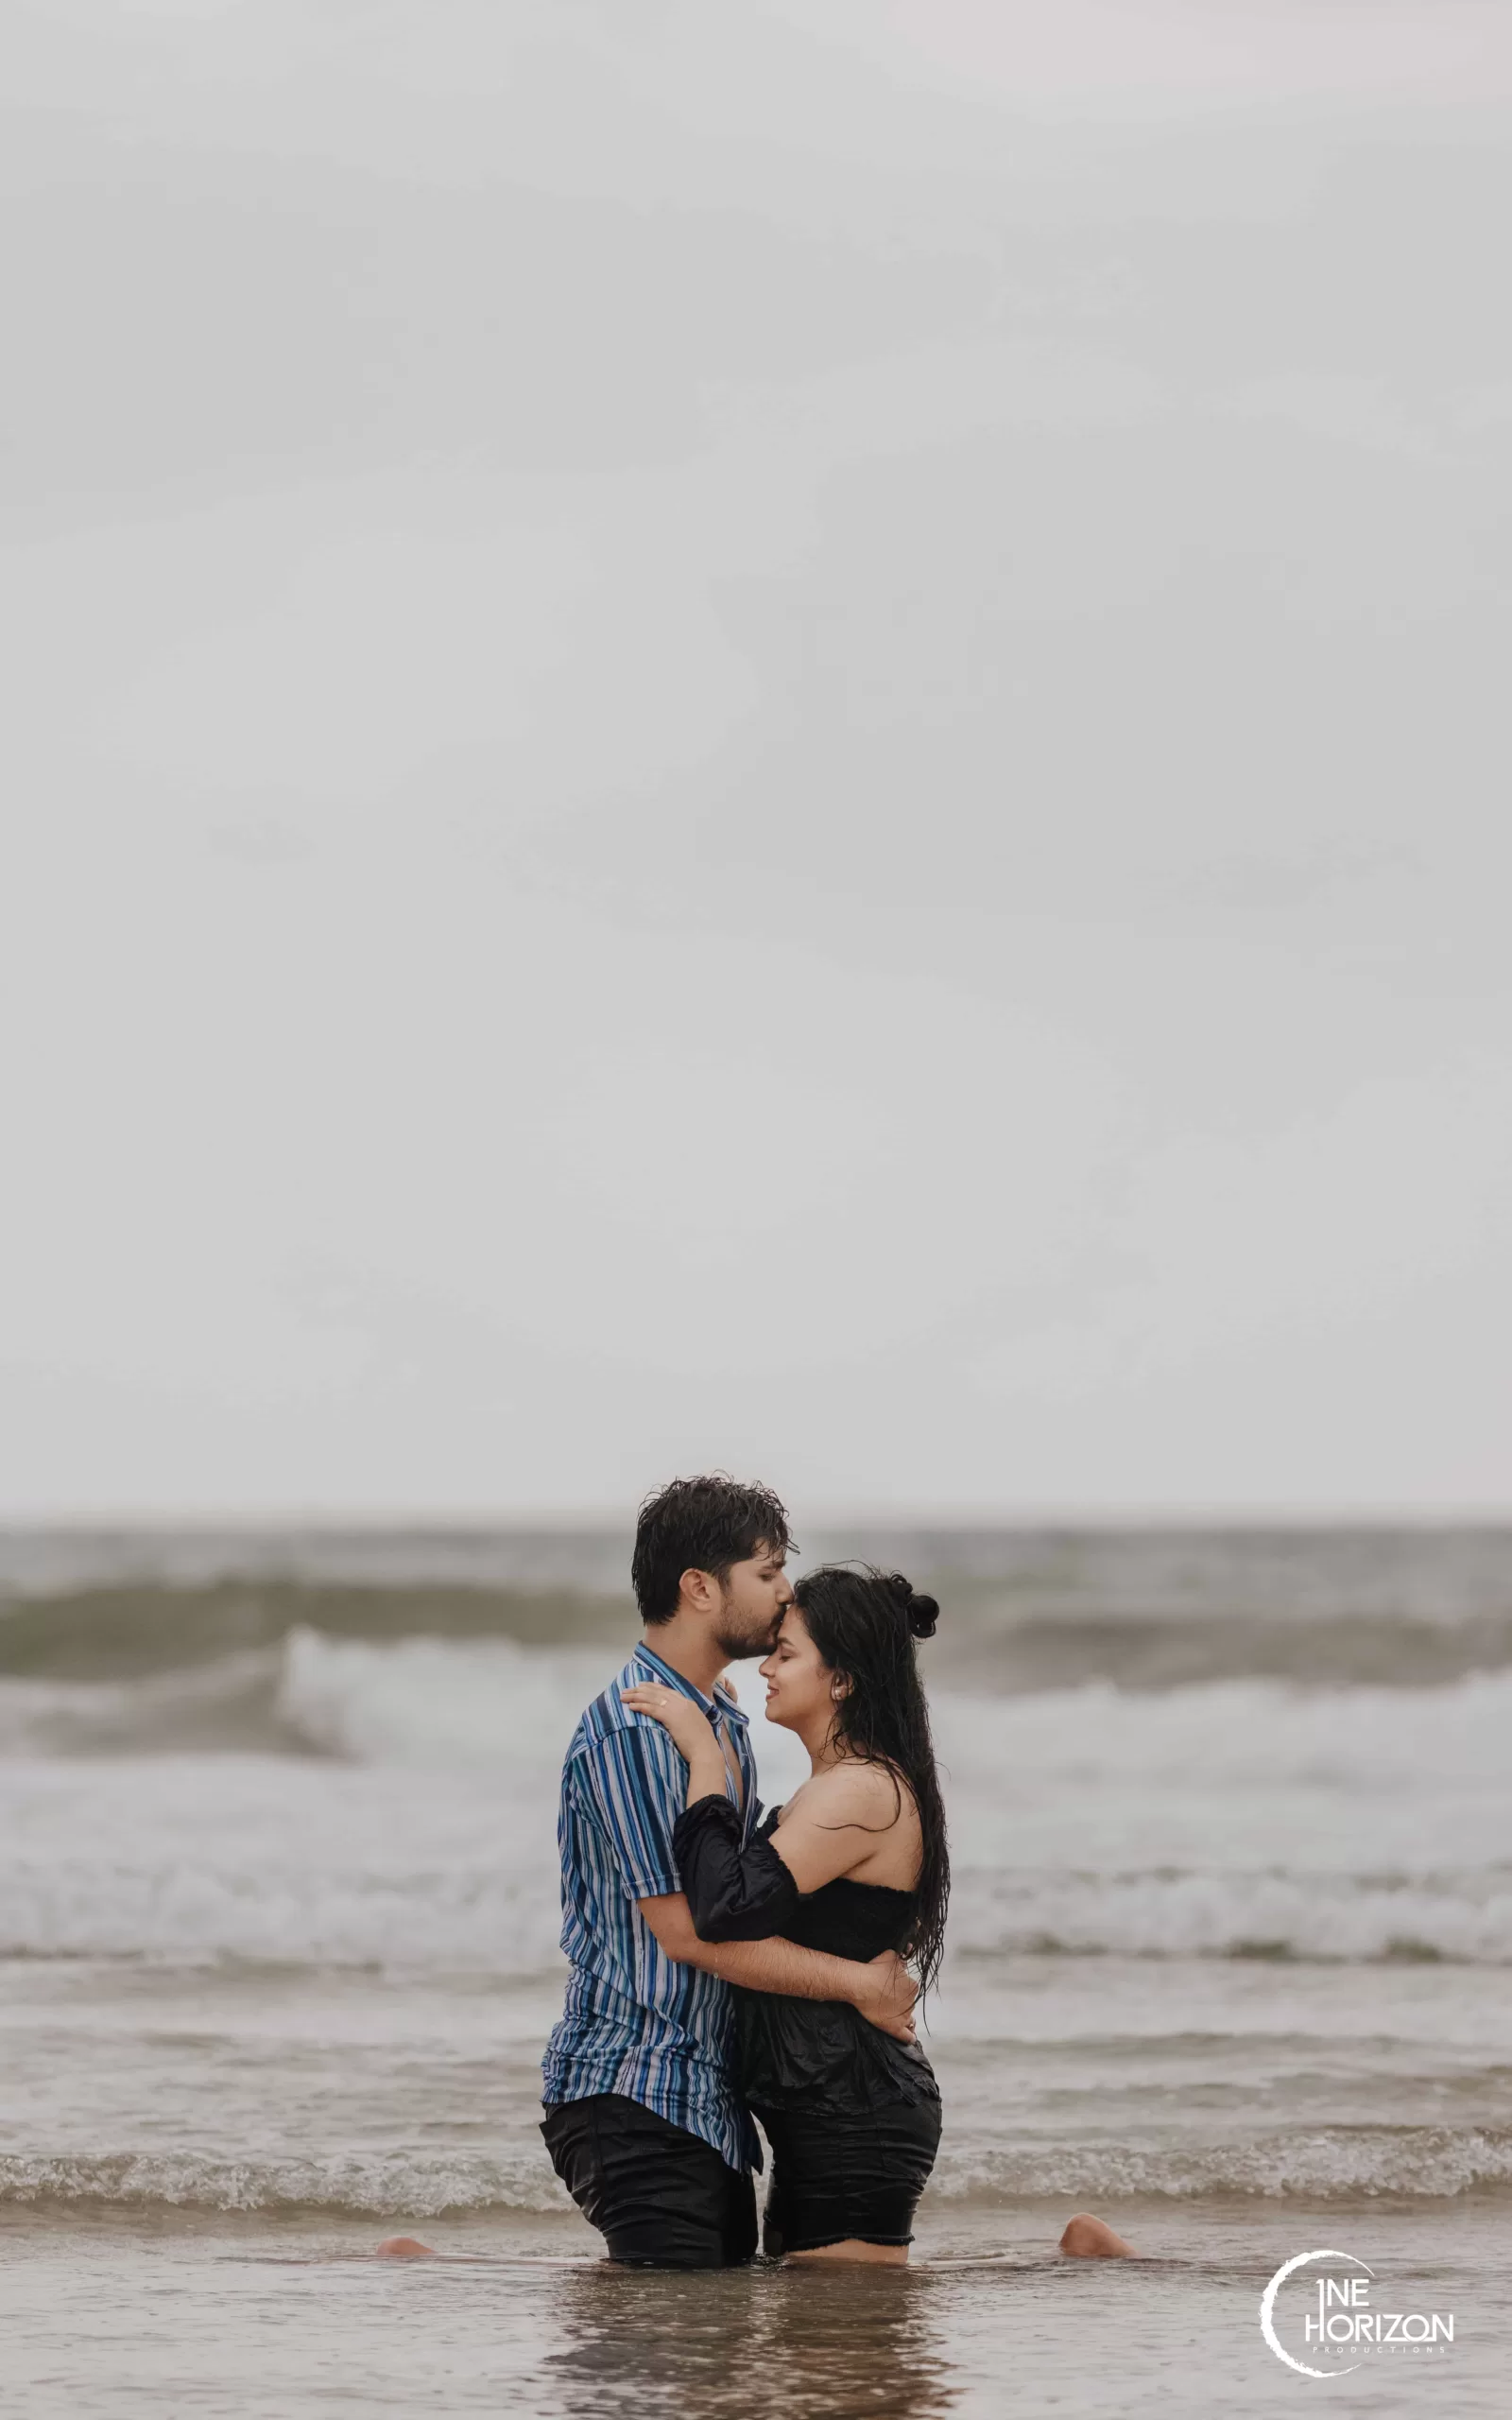 Jacksonville Engagement Photography | Classy, colorful, traditional pre  wedding shoot a… | Wedding bridesmaids photos, Wedding photography studio, Pre  wedding poses